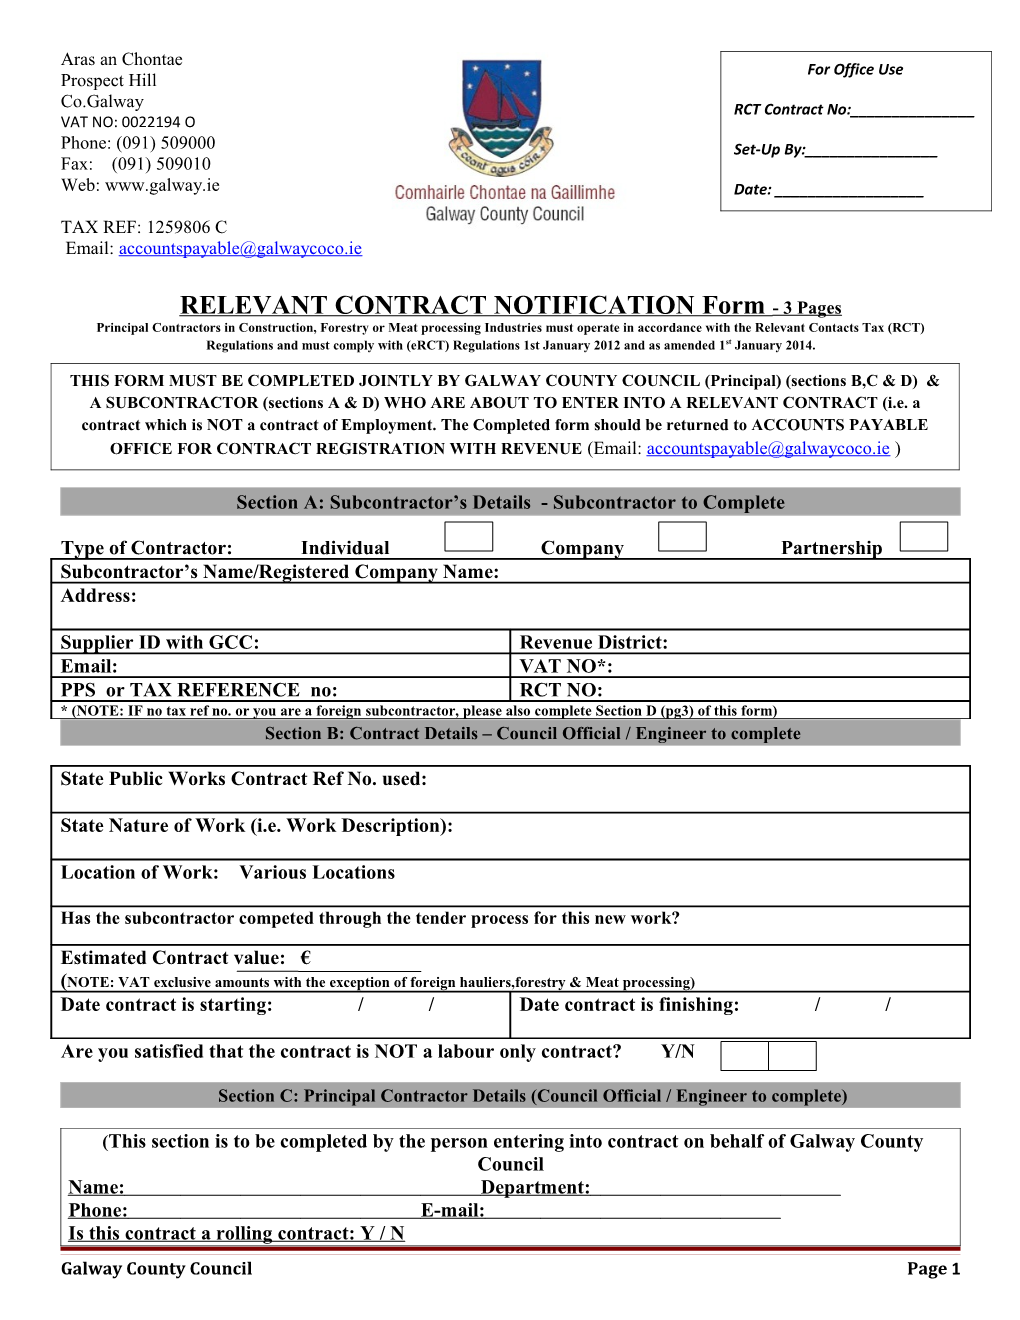 RELEVANT CONTRACT NOTIFICATION Form- 3 Pages